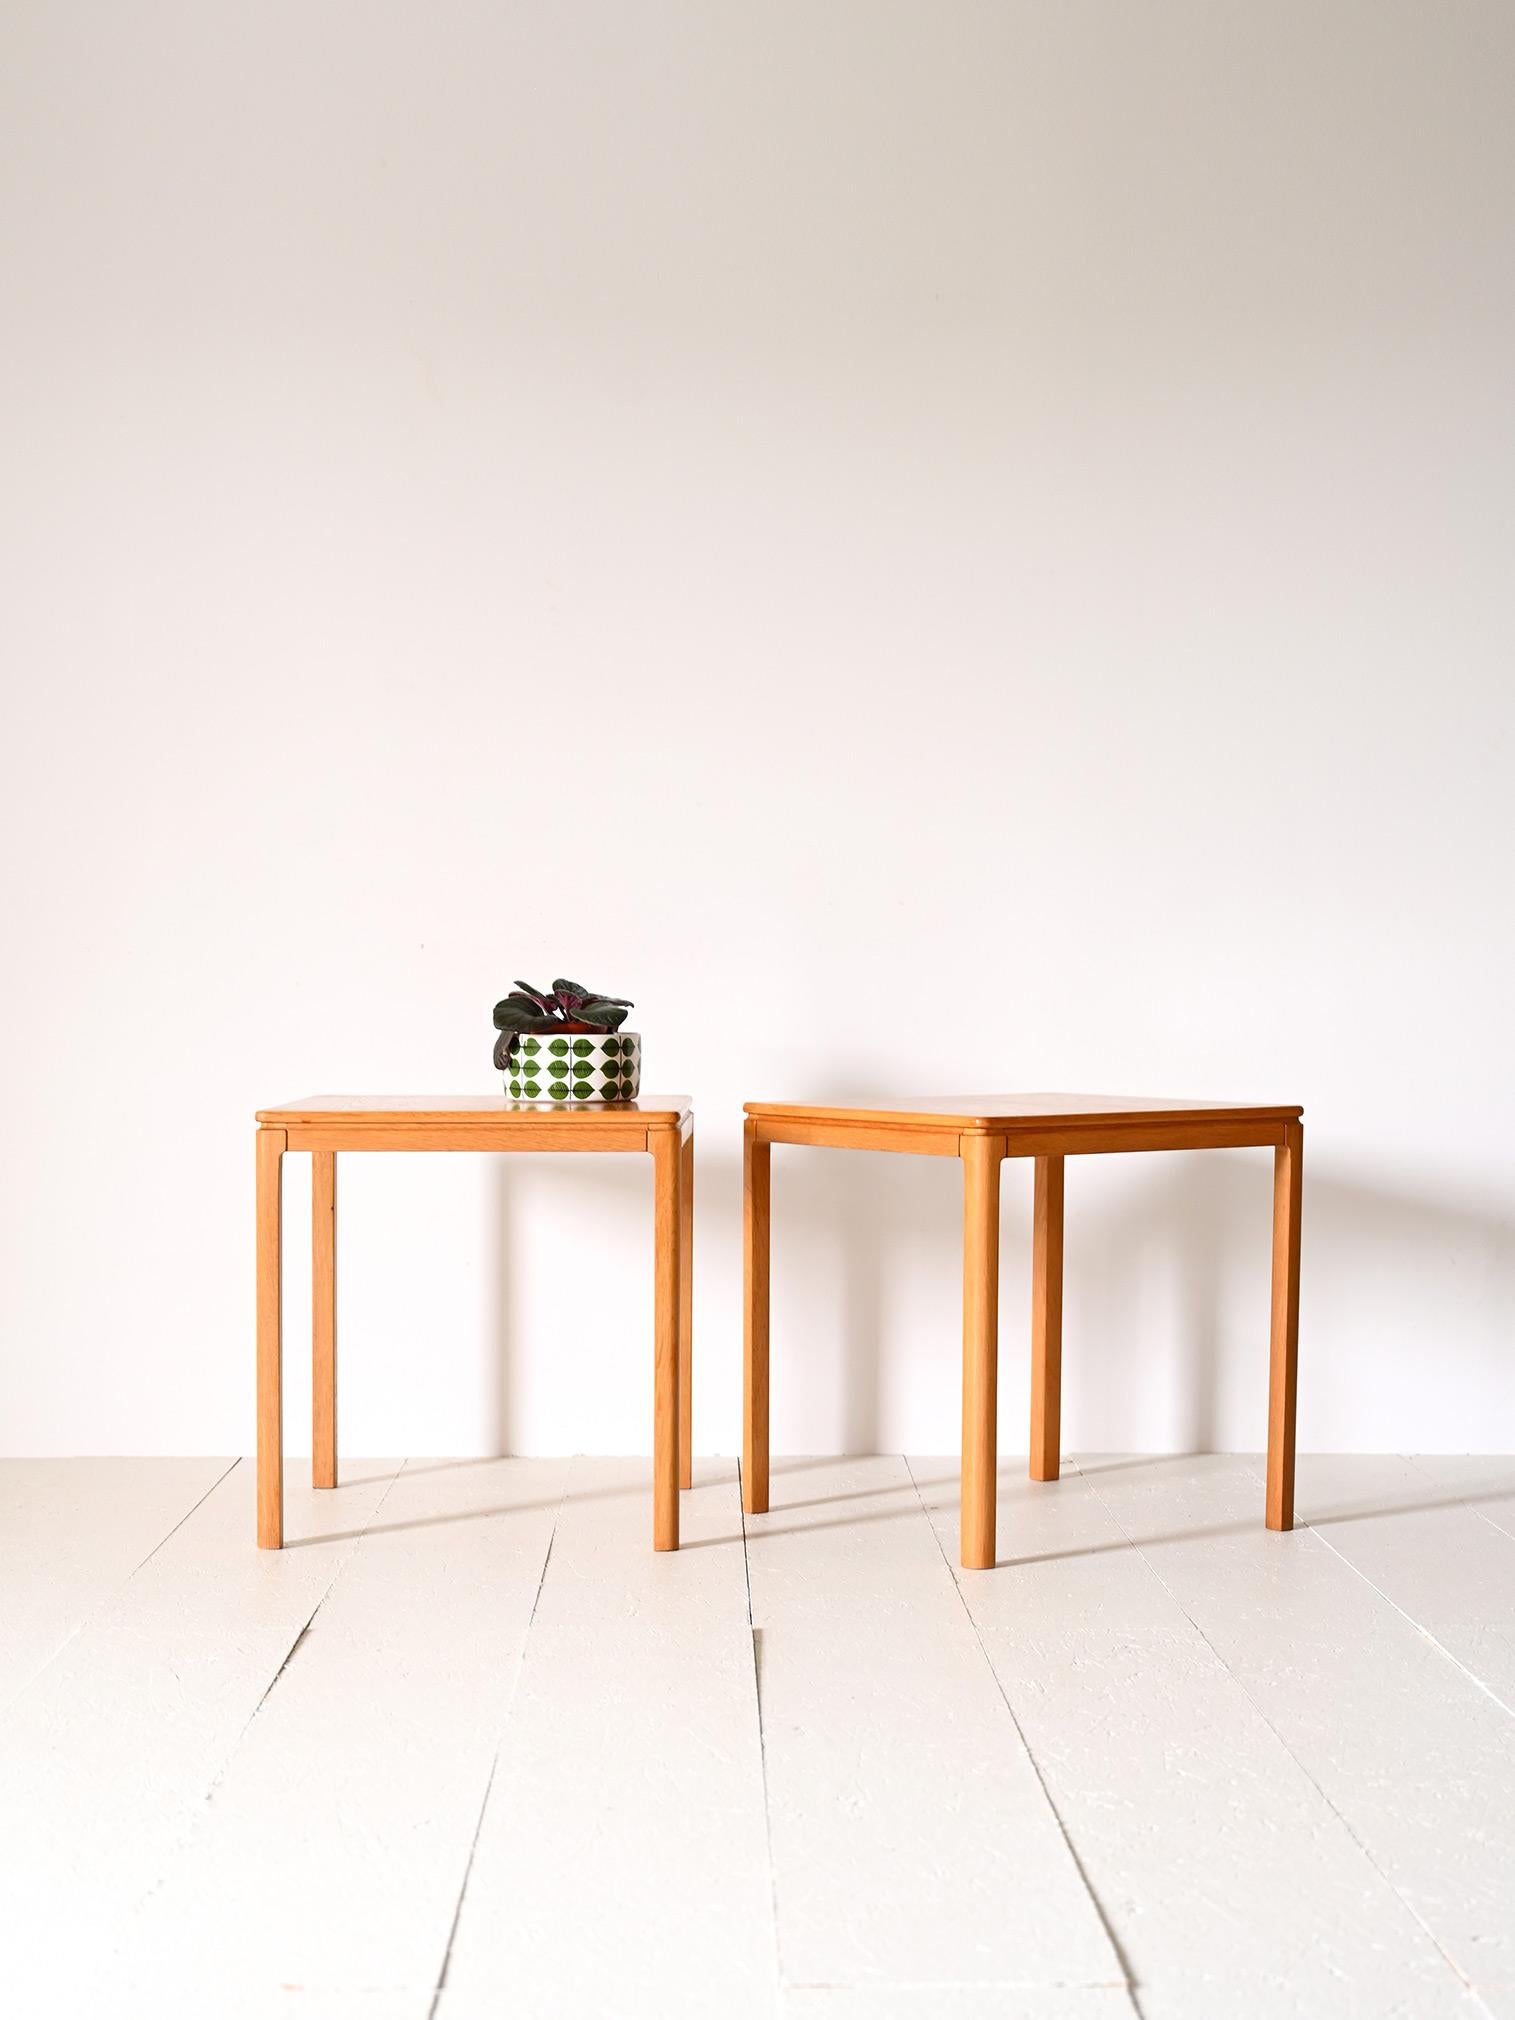 Scandinavian 1960s sofa tables.

Modern furniture pieces with a minimalist design, suitable for inclusion in rooms with a contemporary style.
Consisting of a large square table top with rounded corners and long legs that slender the figure.
Thanks